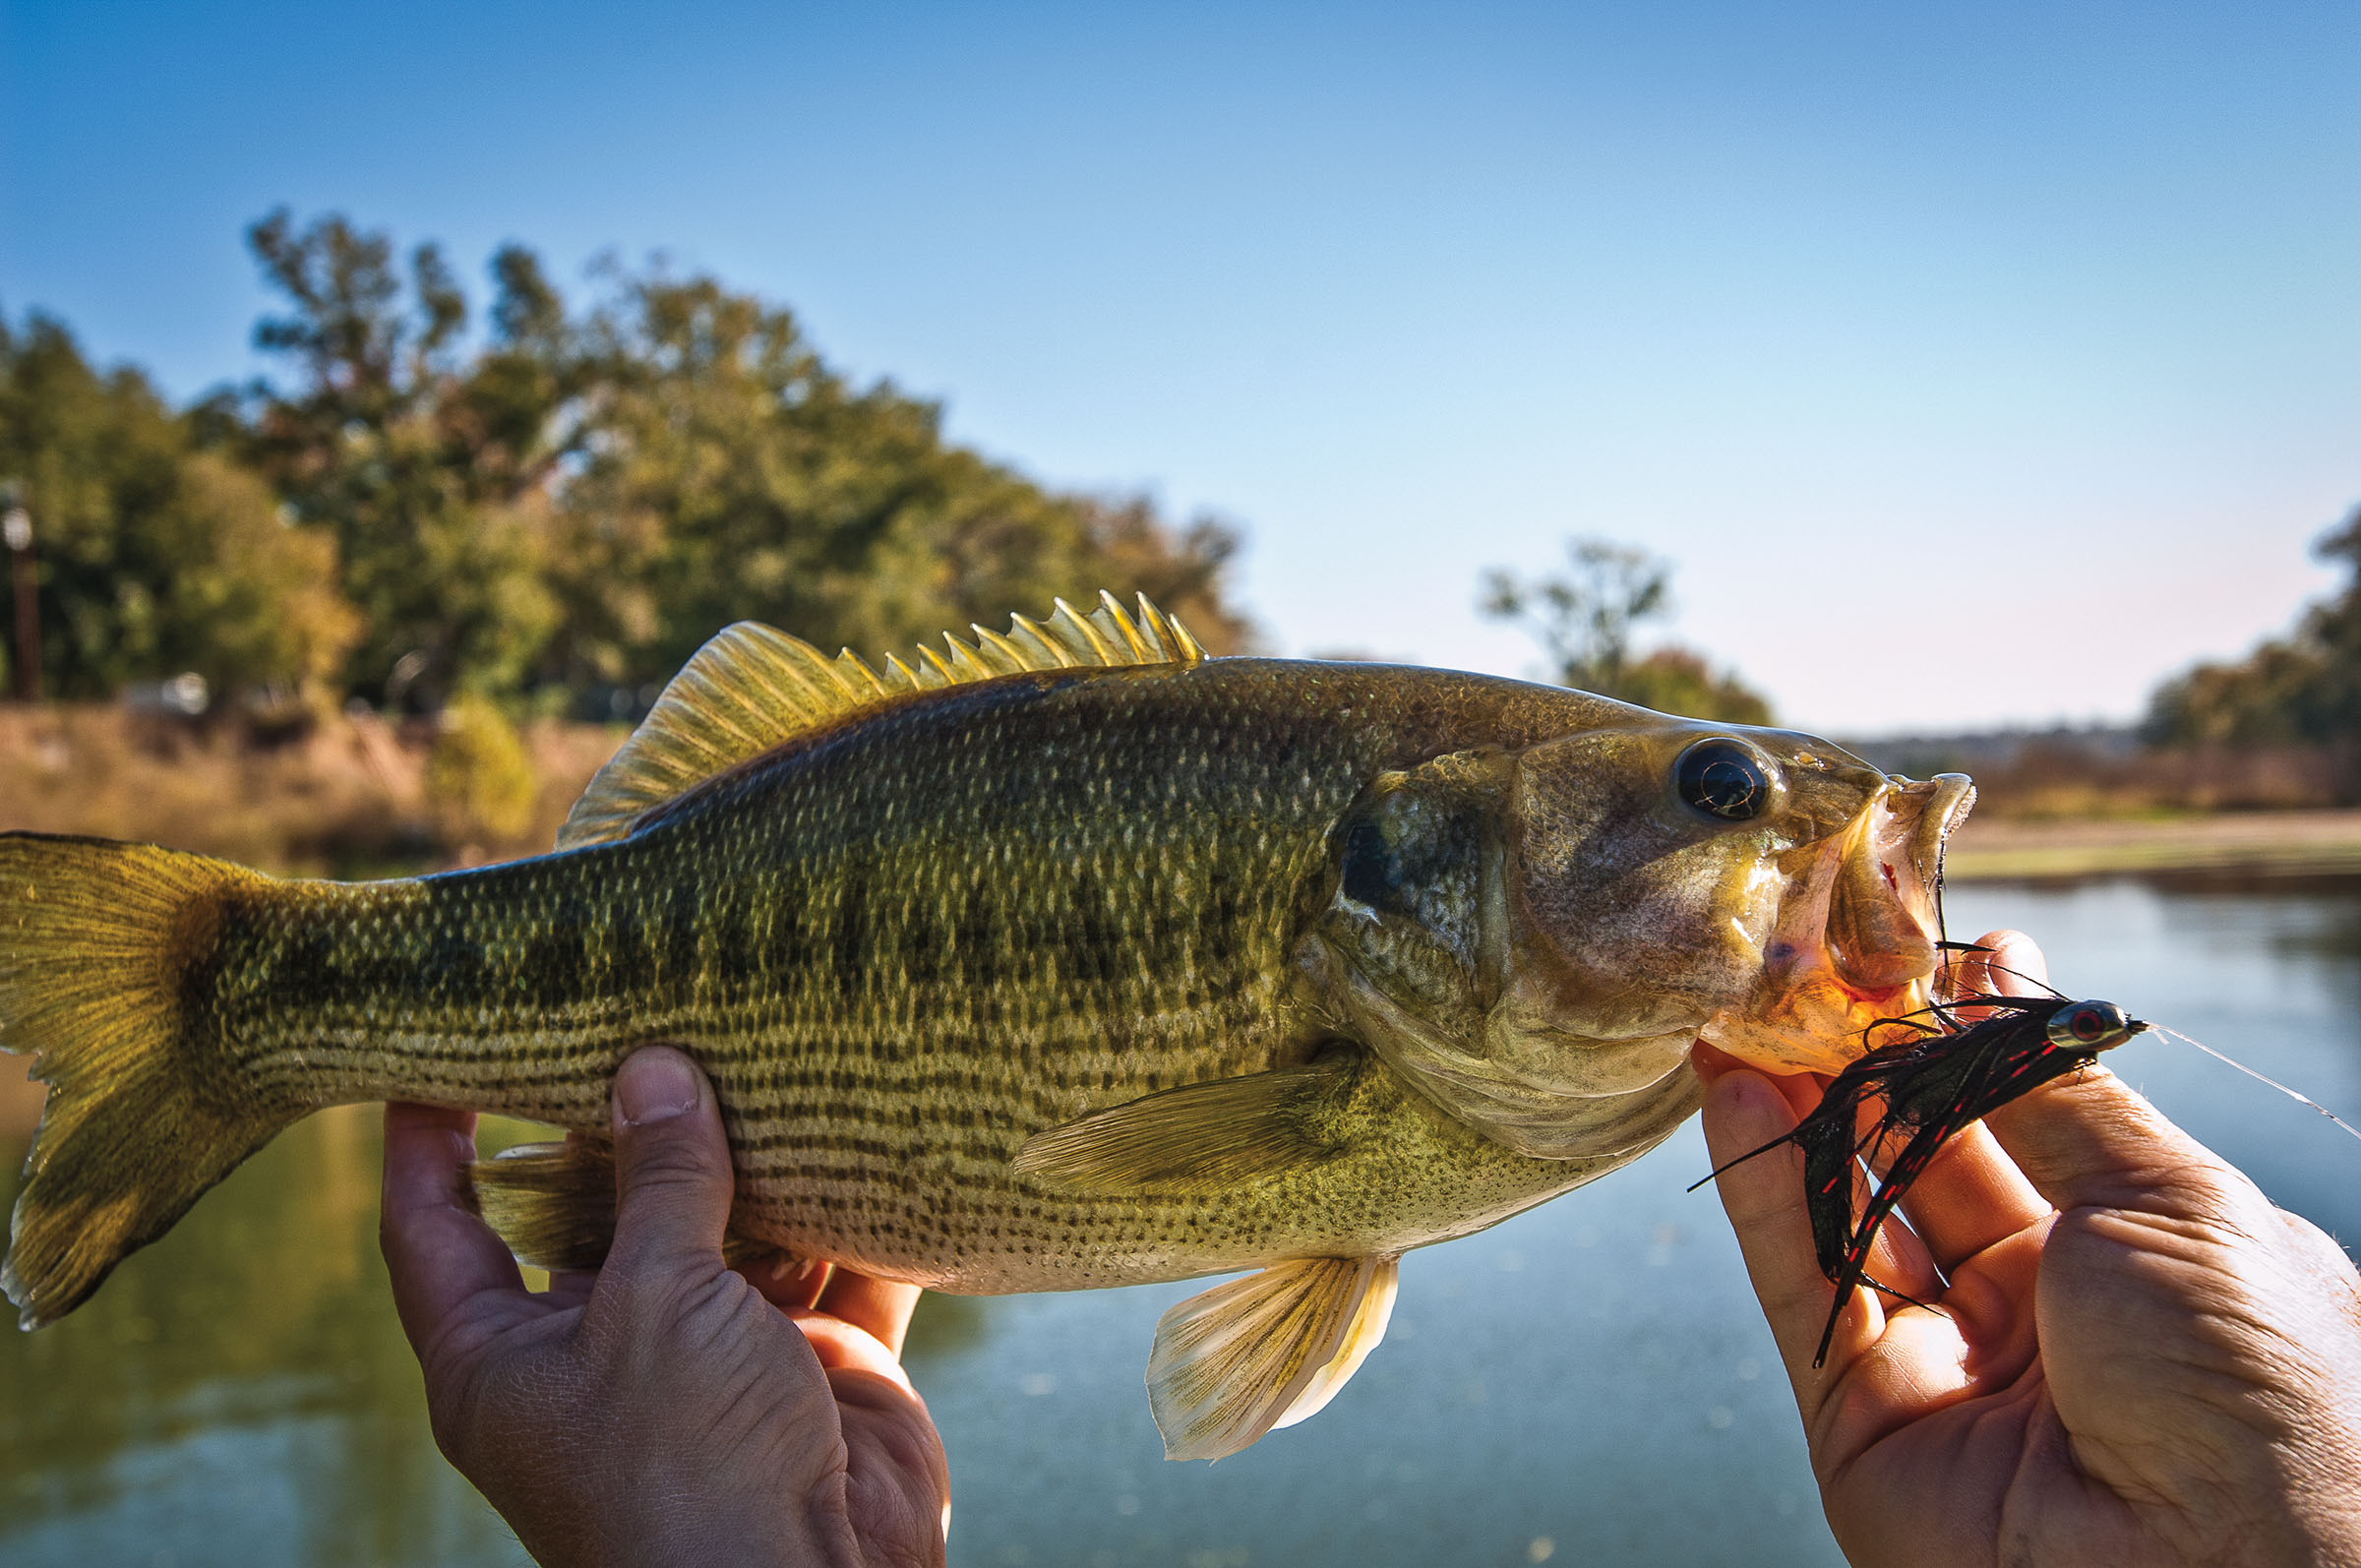 Hands hold a bass at tail and mouth above a river beneath blue sky